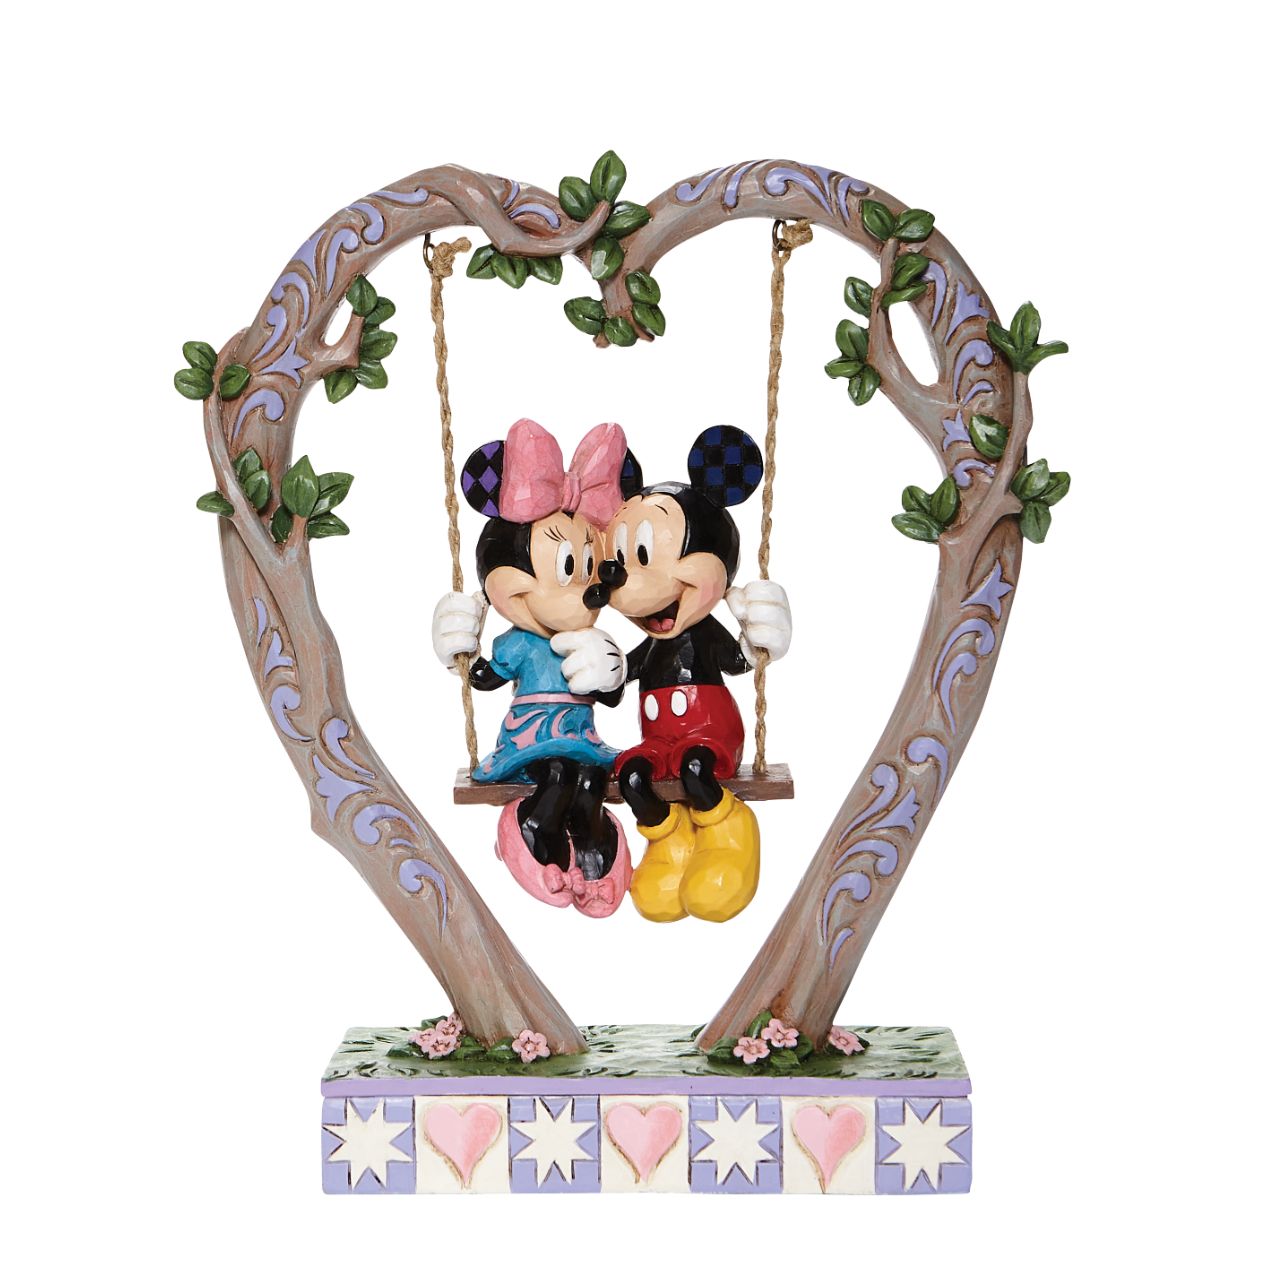 Jim Shore Sweethearts in Swing - Mickey and Minnie on Swing Figurine  Suspended from a heart-shaped branch, a smitten Mickey and Minnie swing into Spring in this quintessentially romantic Jim Shore sculpture.